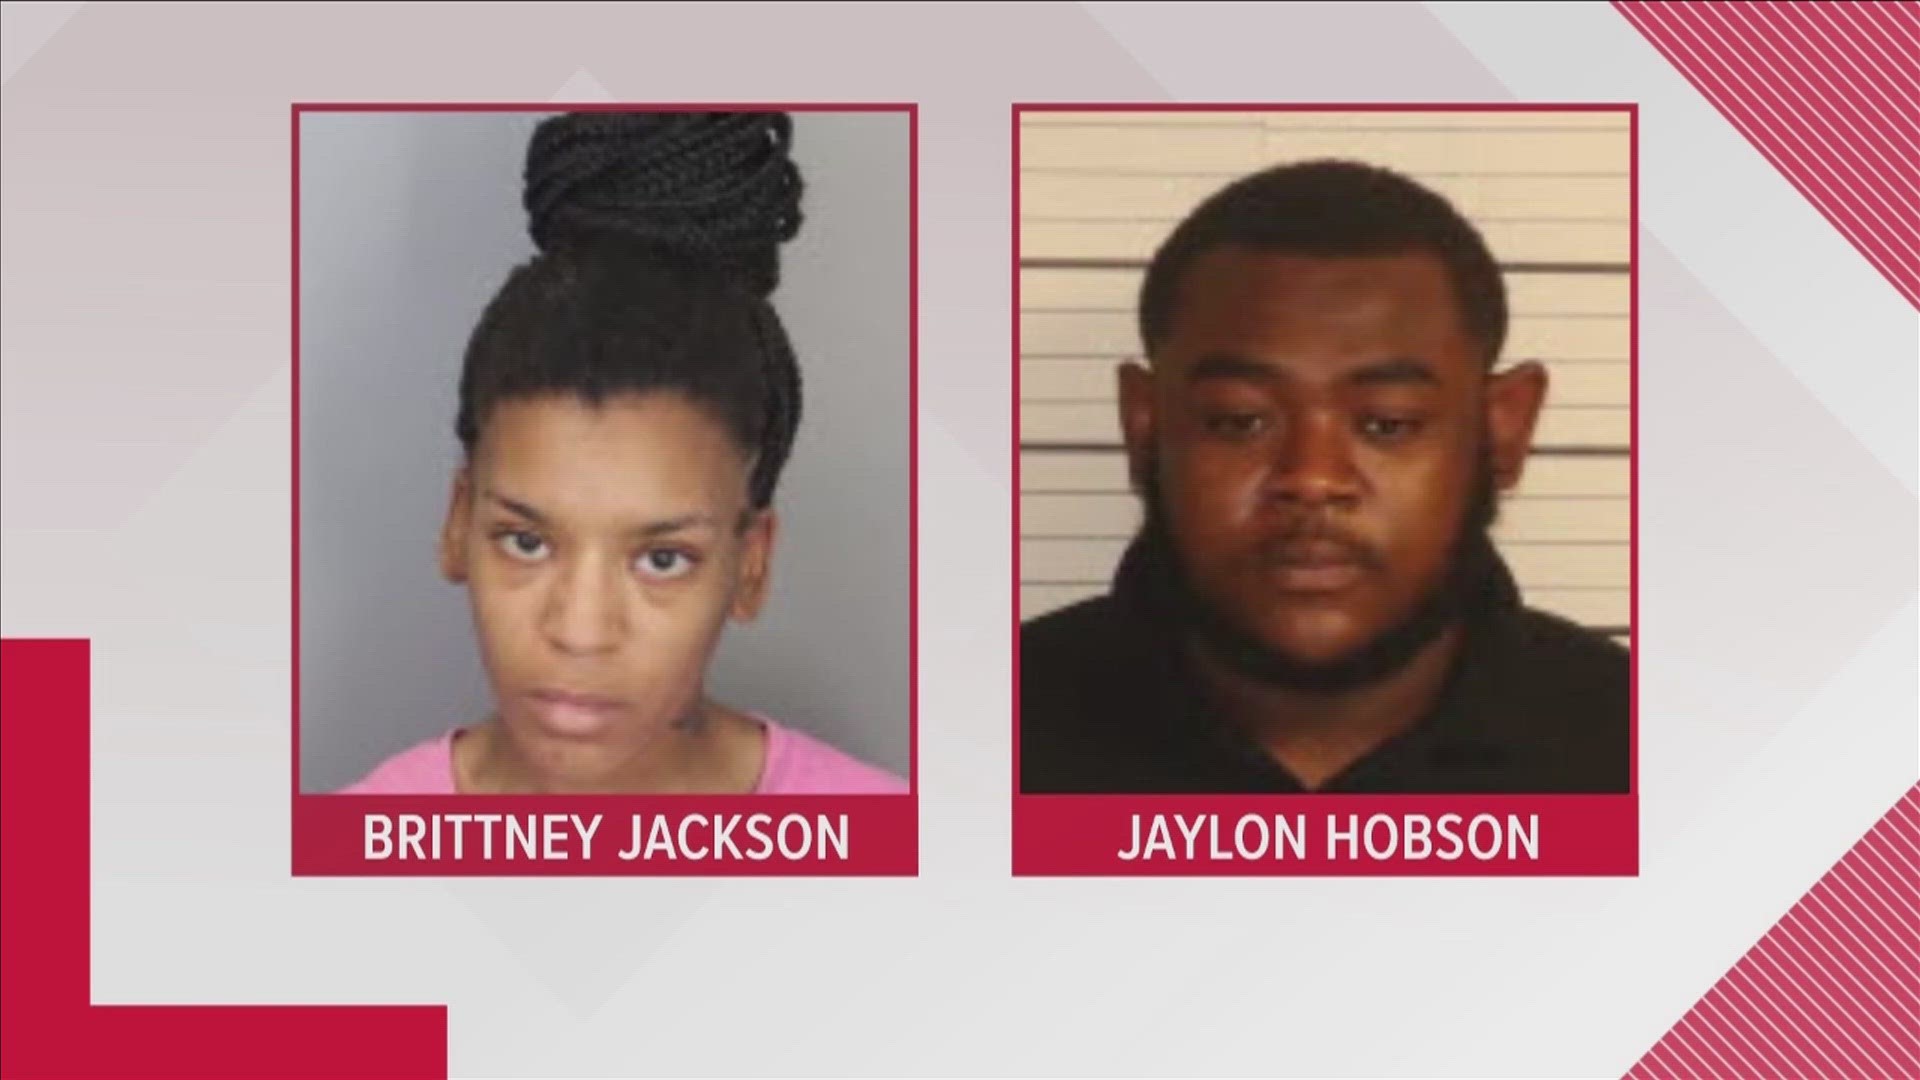 According to the court affidavits, Brittney Jackson admitted her daughter Sequoia Samuels had been dead for weeks before the little girl was reported missing.